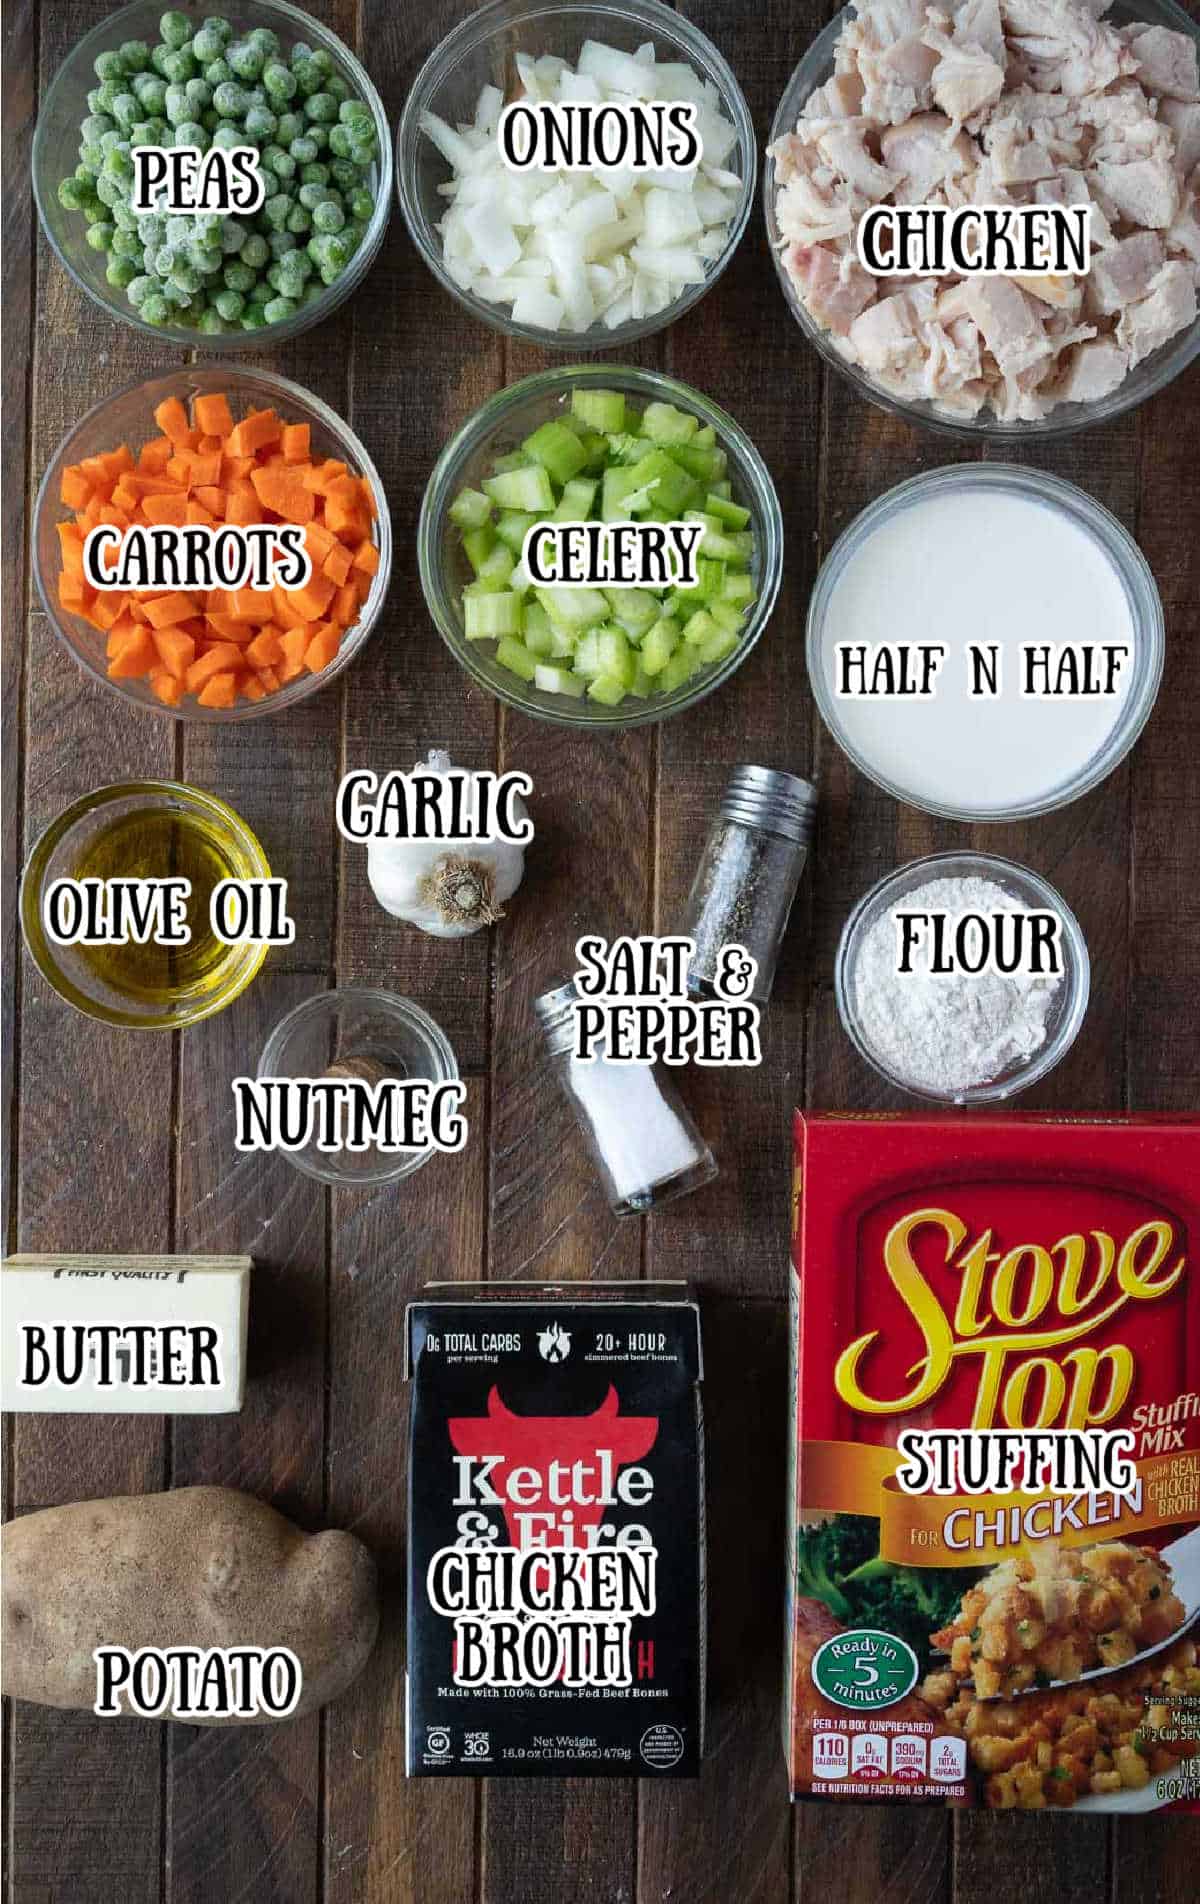 All the ingredients needed for this casserole.